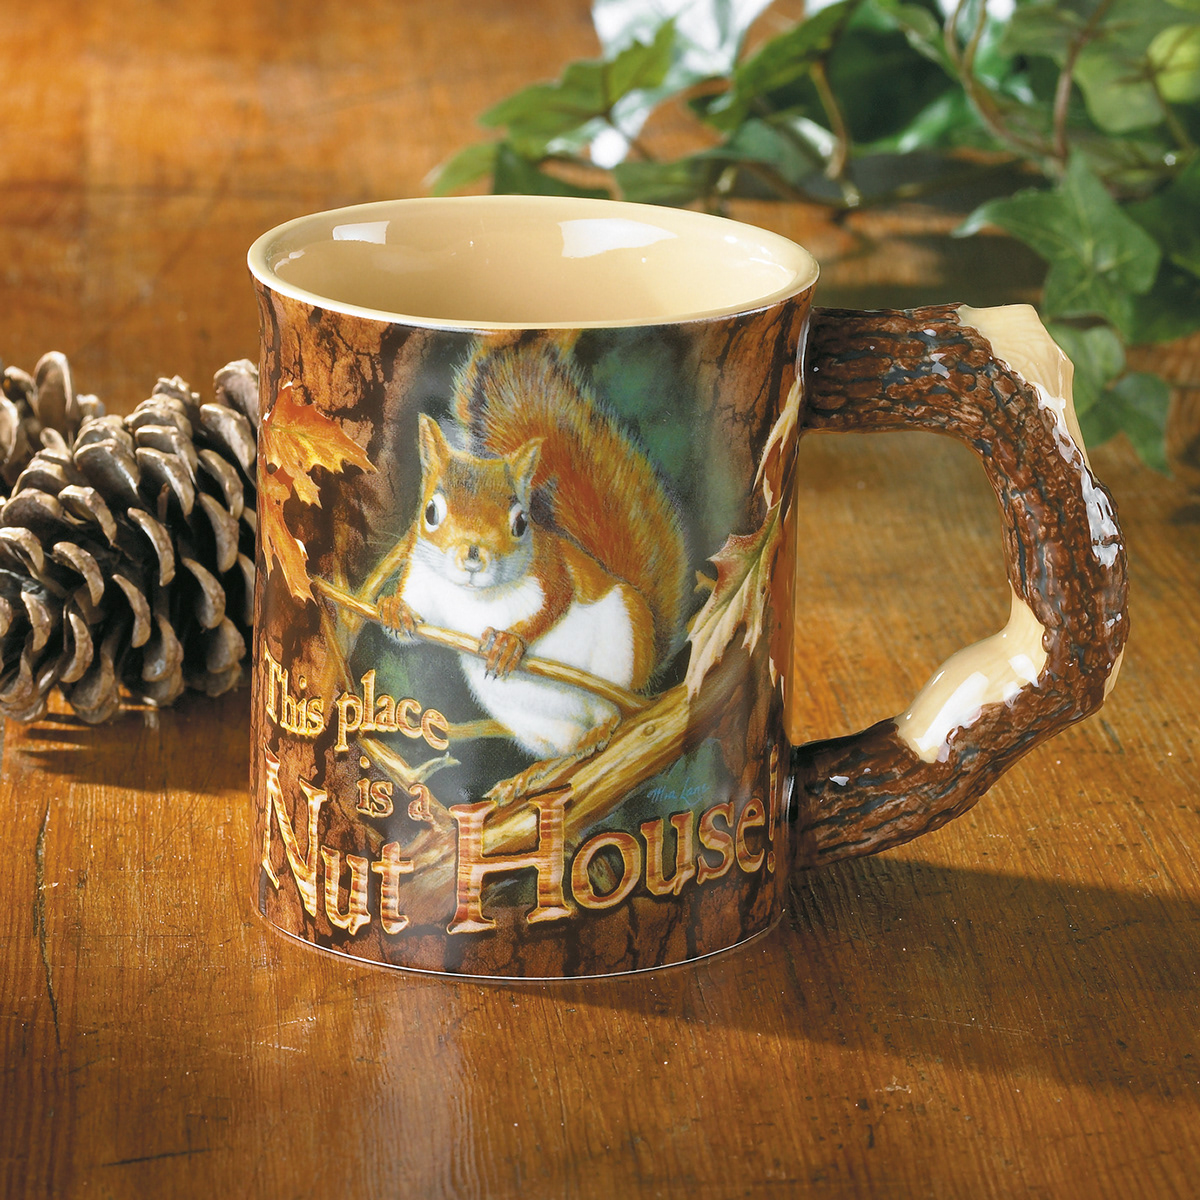 Coffee mug with handle sculpted like a tree branch and featuring a squirrel image by Mia Lane.